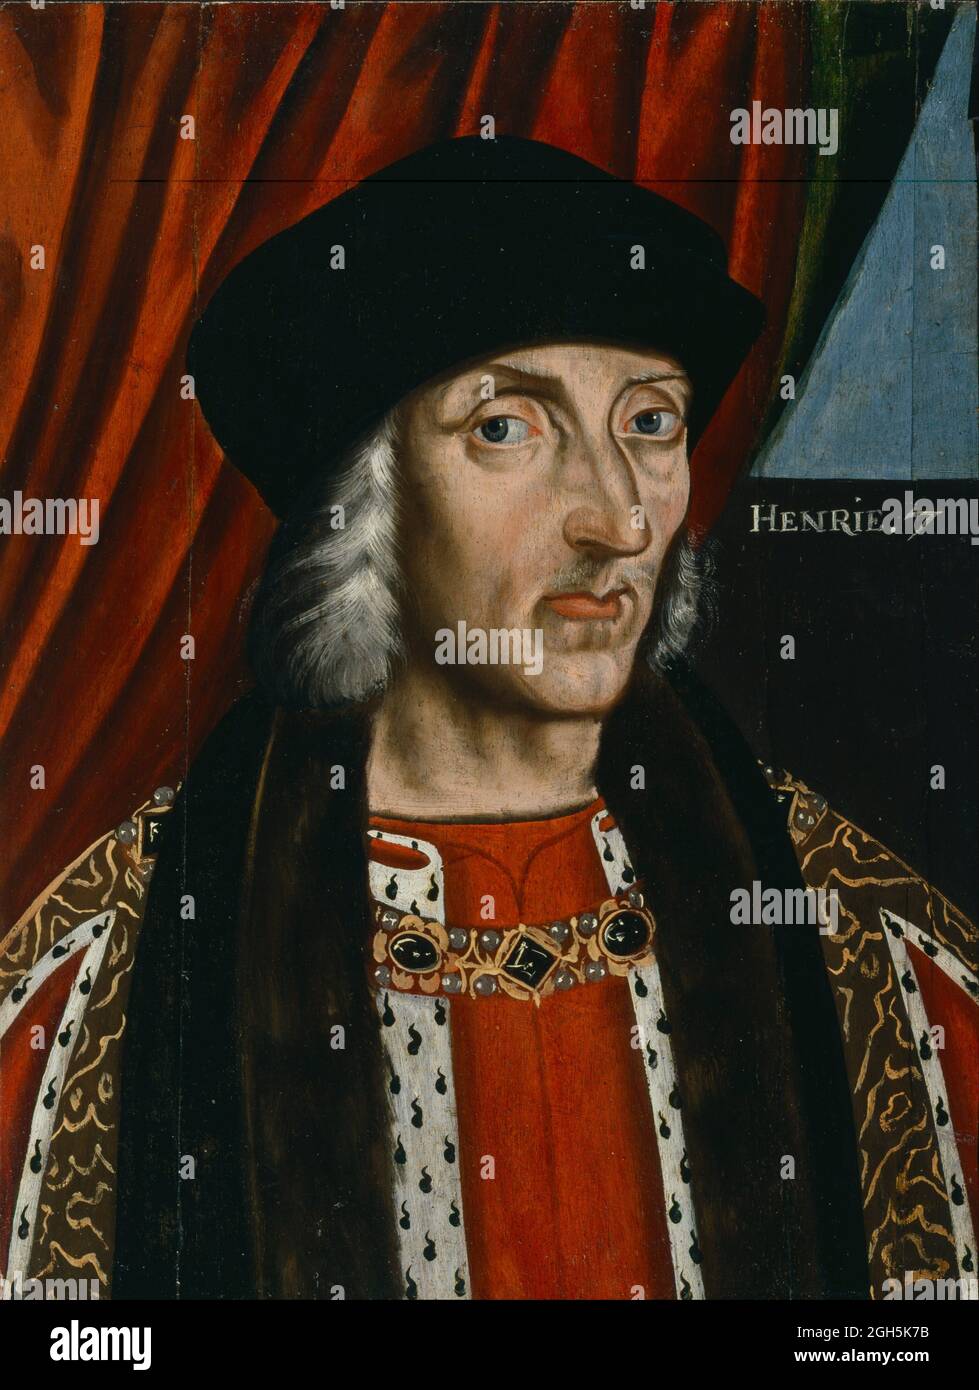 A portrait of King Henry VII who was King of England from 1485 until 1509 Stock Photo